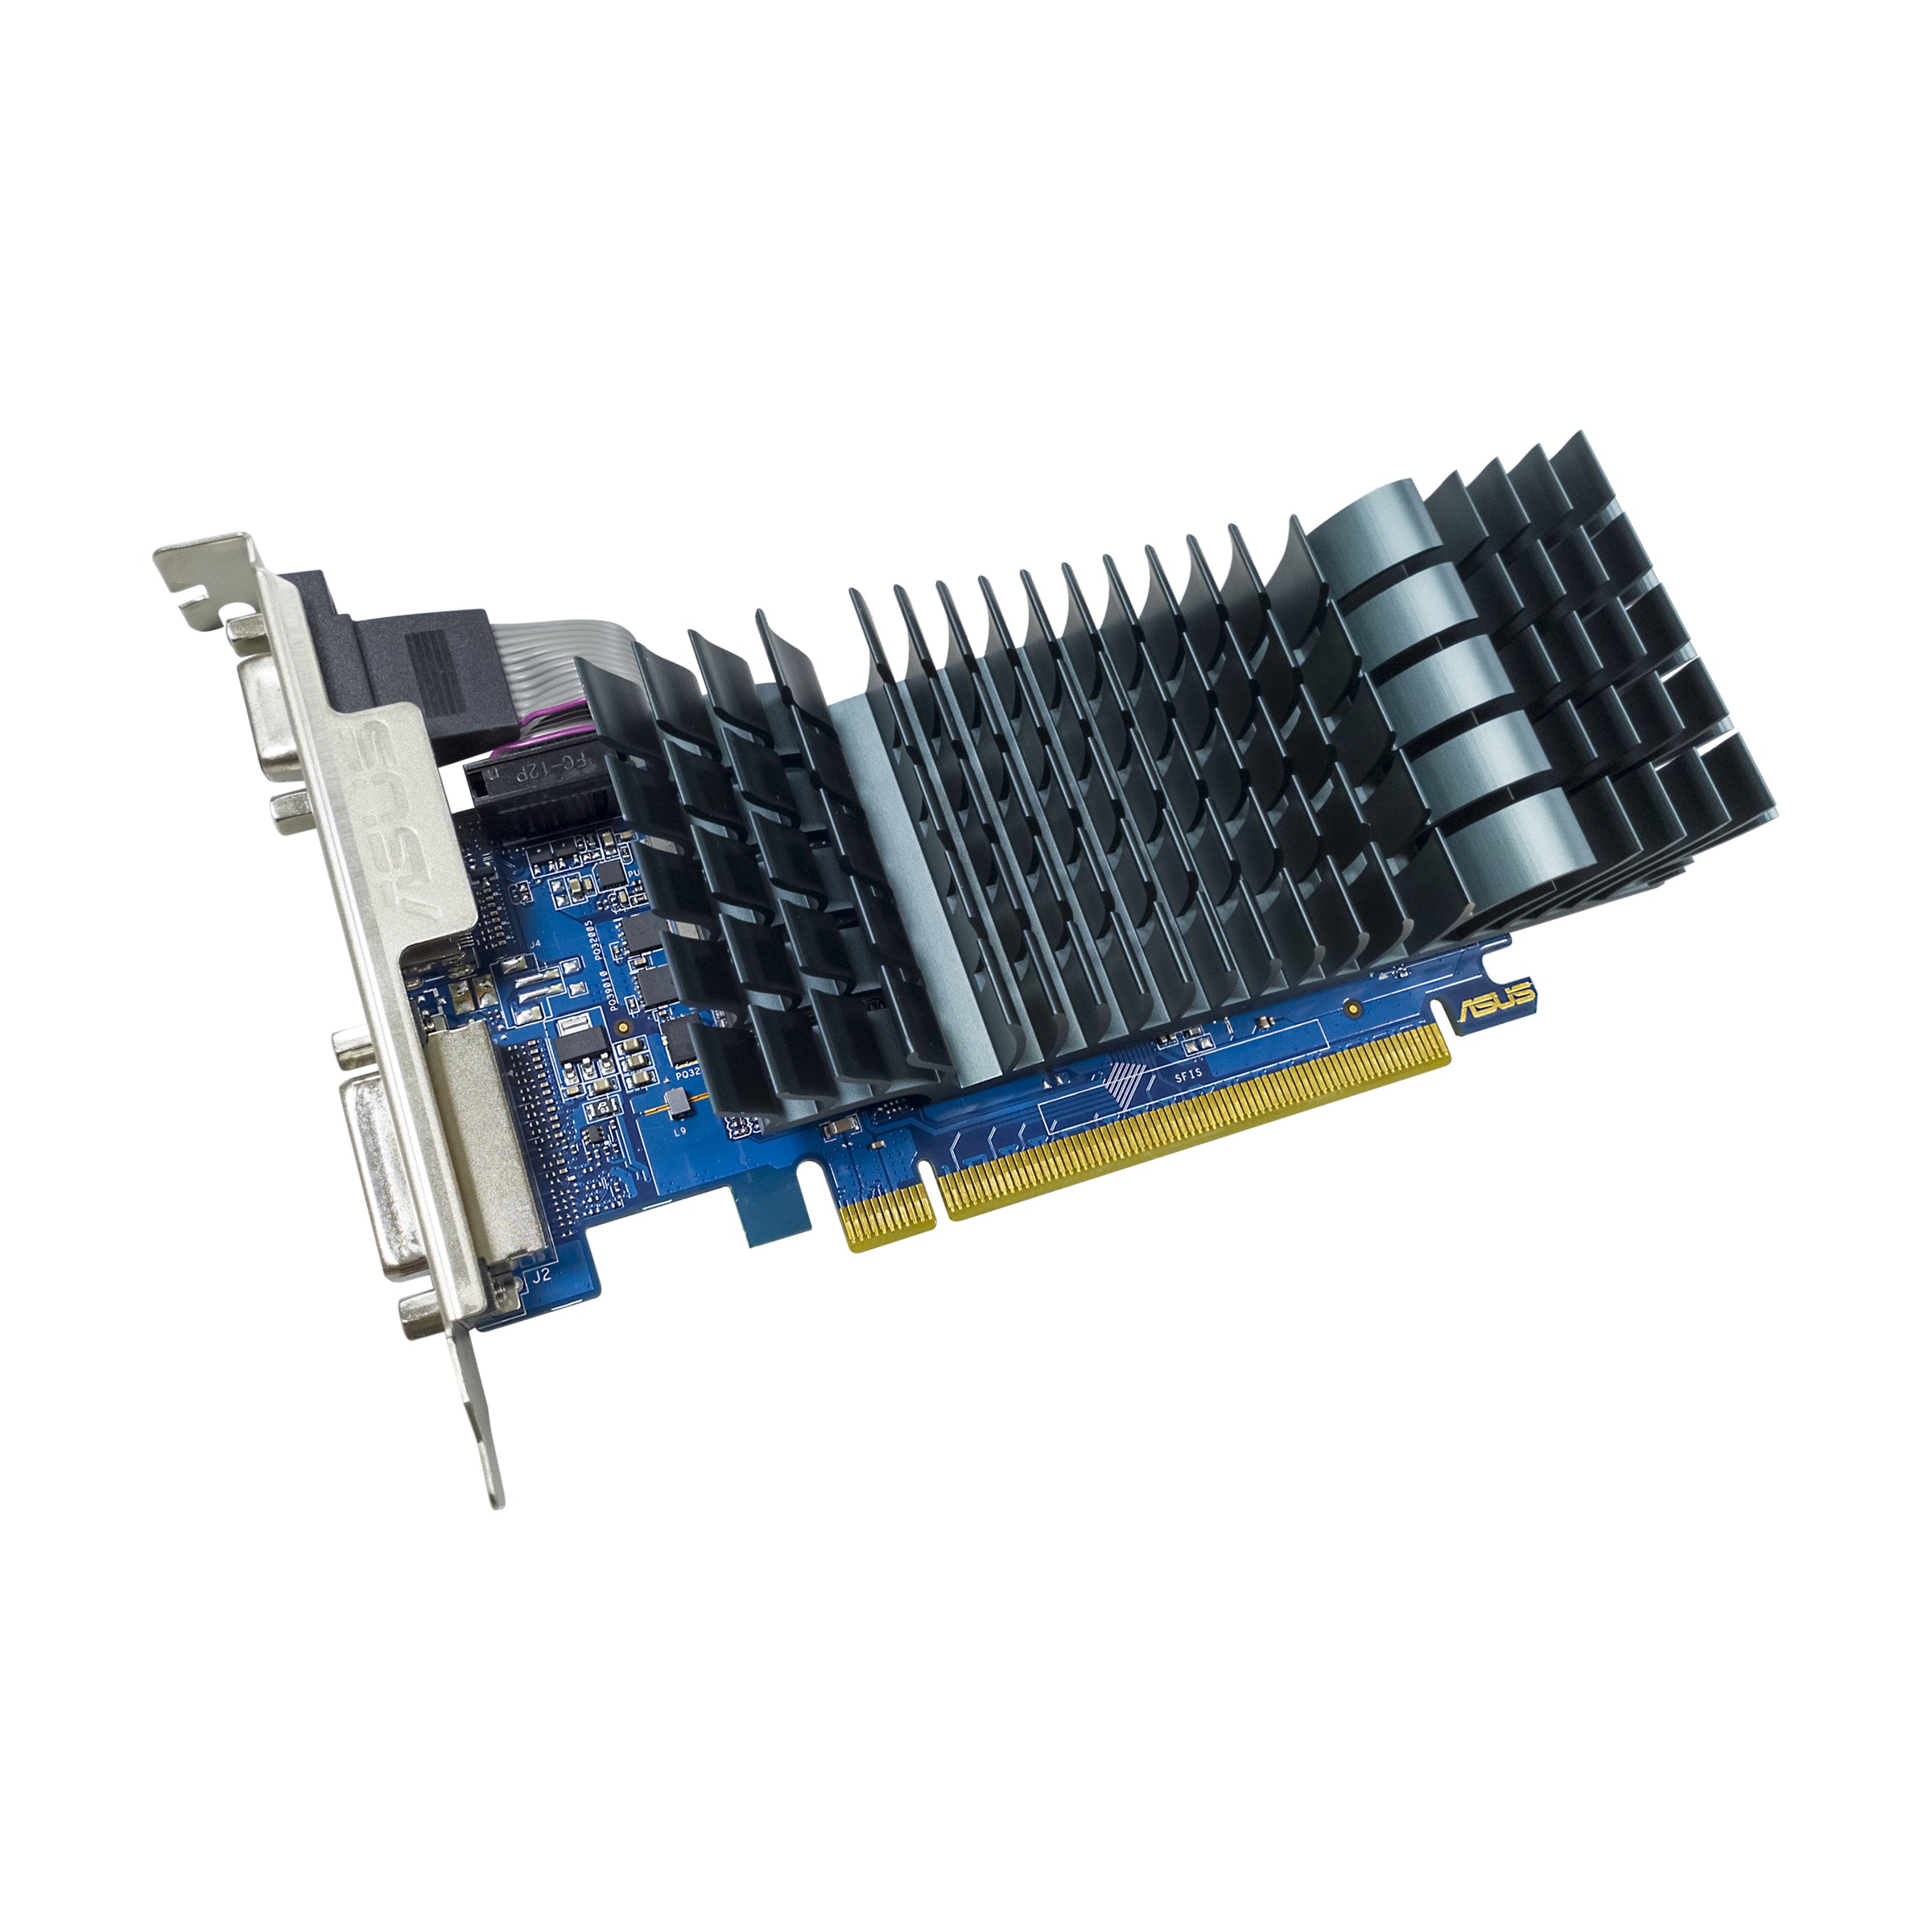 ASUS GeForce GT 710 2GB DDR3 EVO Silent with Low Profile Bracket